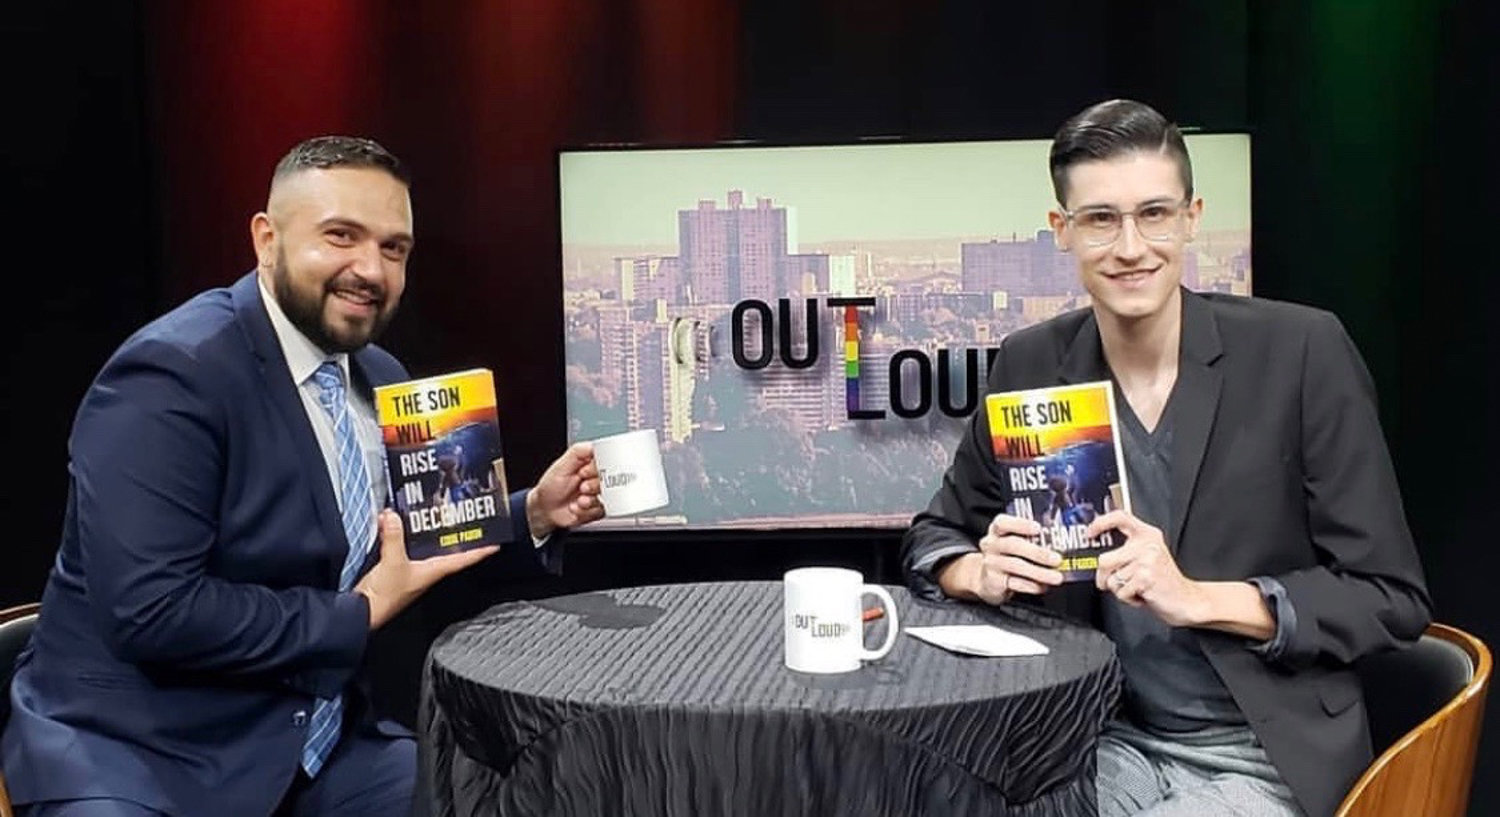 Anthony Parker, right, sits down with local author Eddie Pabon, left, to talk about his novel ‘The Son Will Rise in December,’ for the ‘Out Loud’ television program on BronxNet.